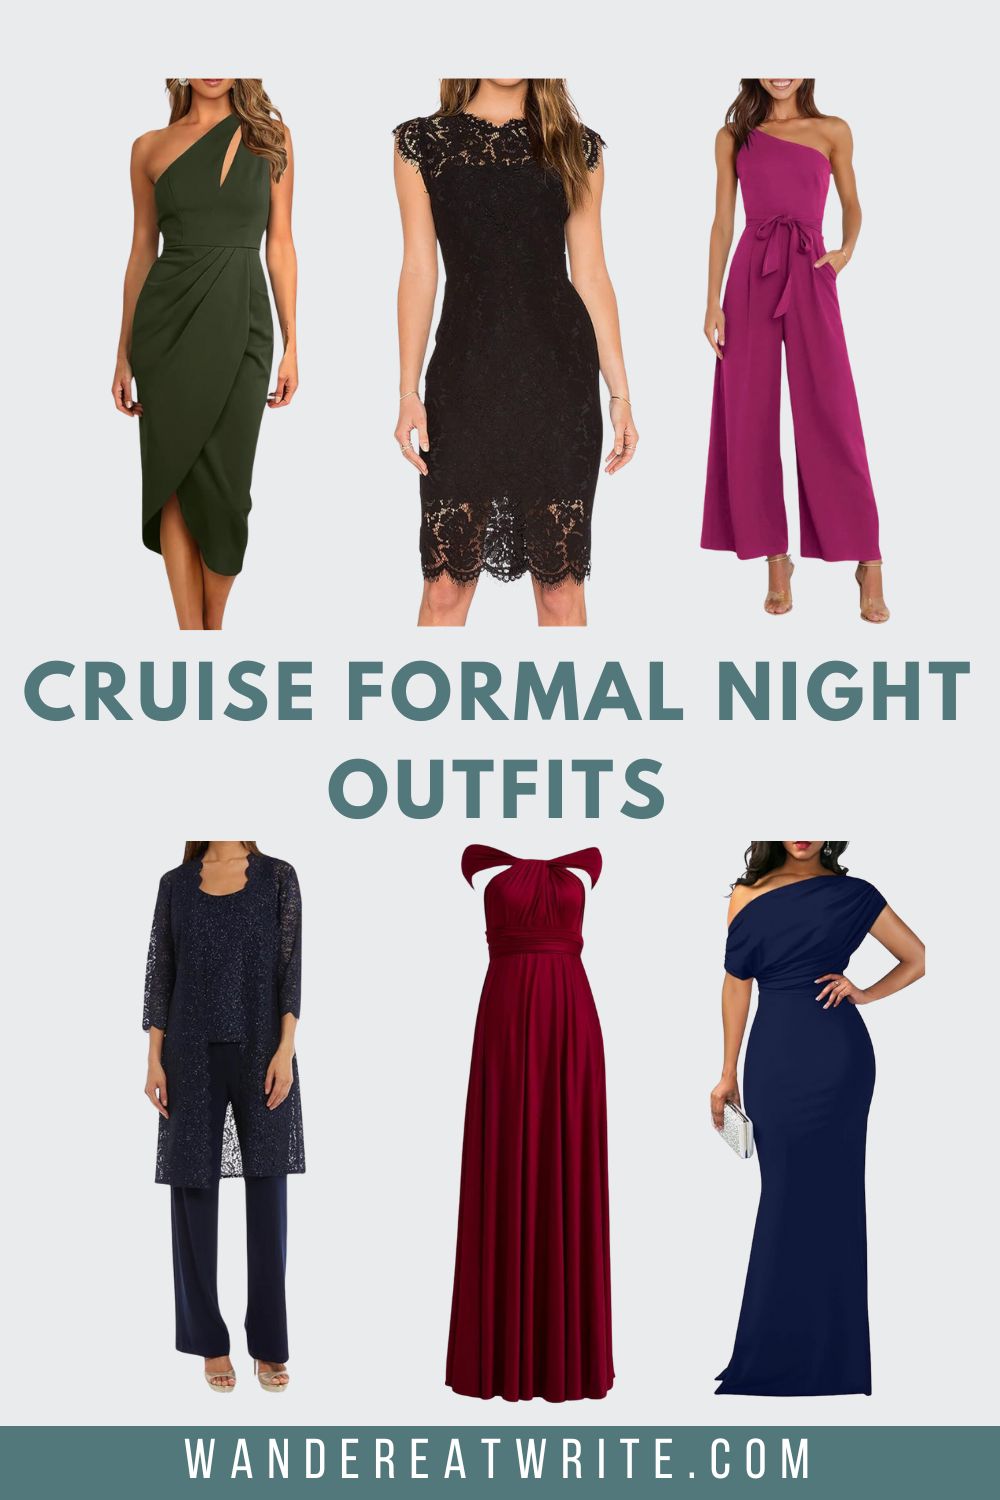 Cruise formal night outfit ideas for women. Photos clockwise from top left: forest green one-shoulder cocktail dress, black cocktail dress with lace, magenta one-shoulder dressy jumpsuit with waist tie, navy off-the-shoulder floor-length gown, ruby infinity dress, dark navy two-piece mother-of-the-bride set